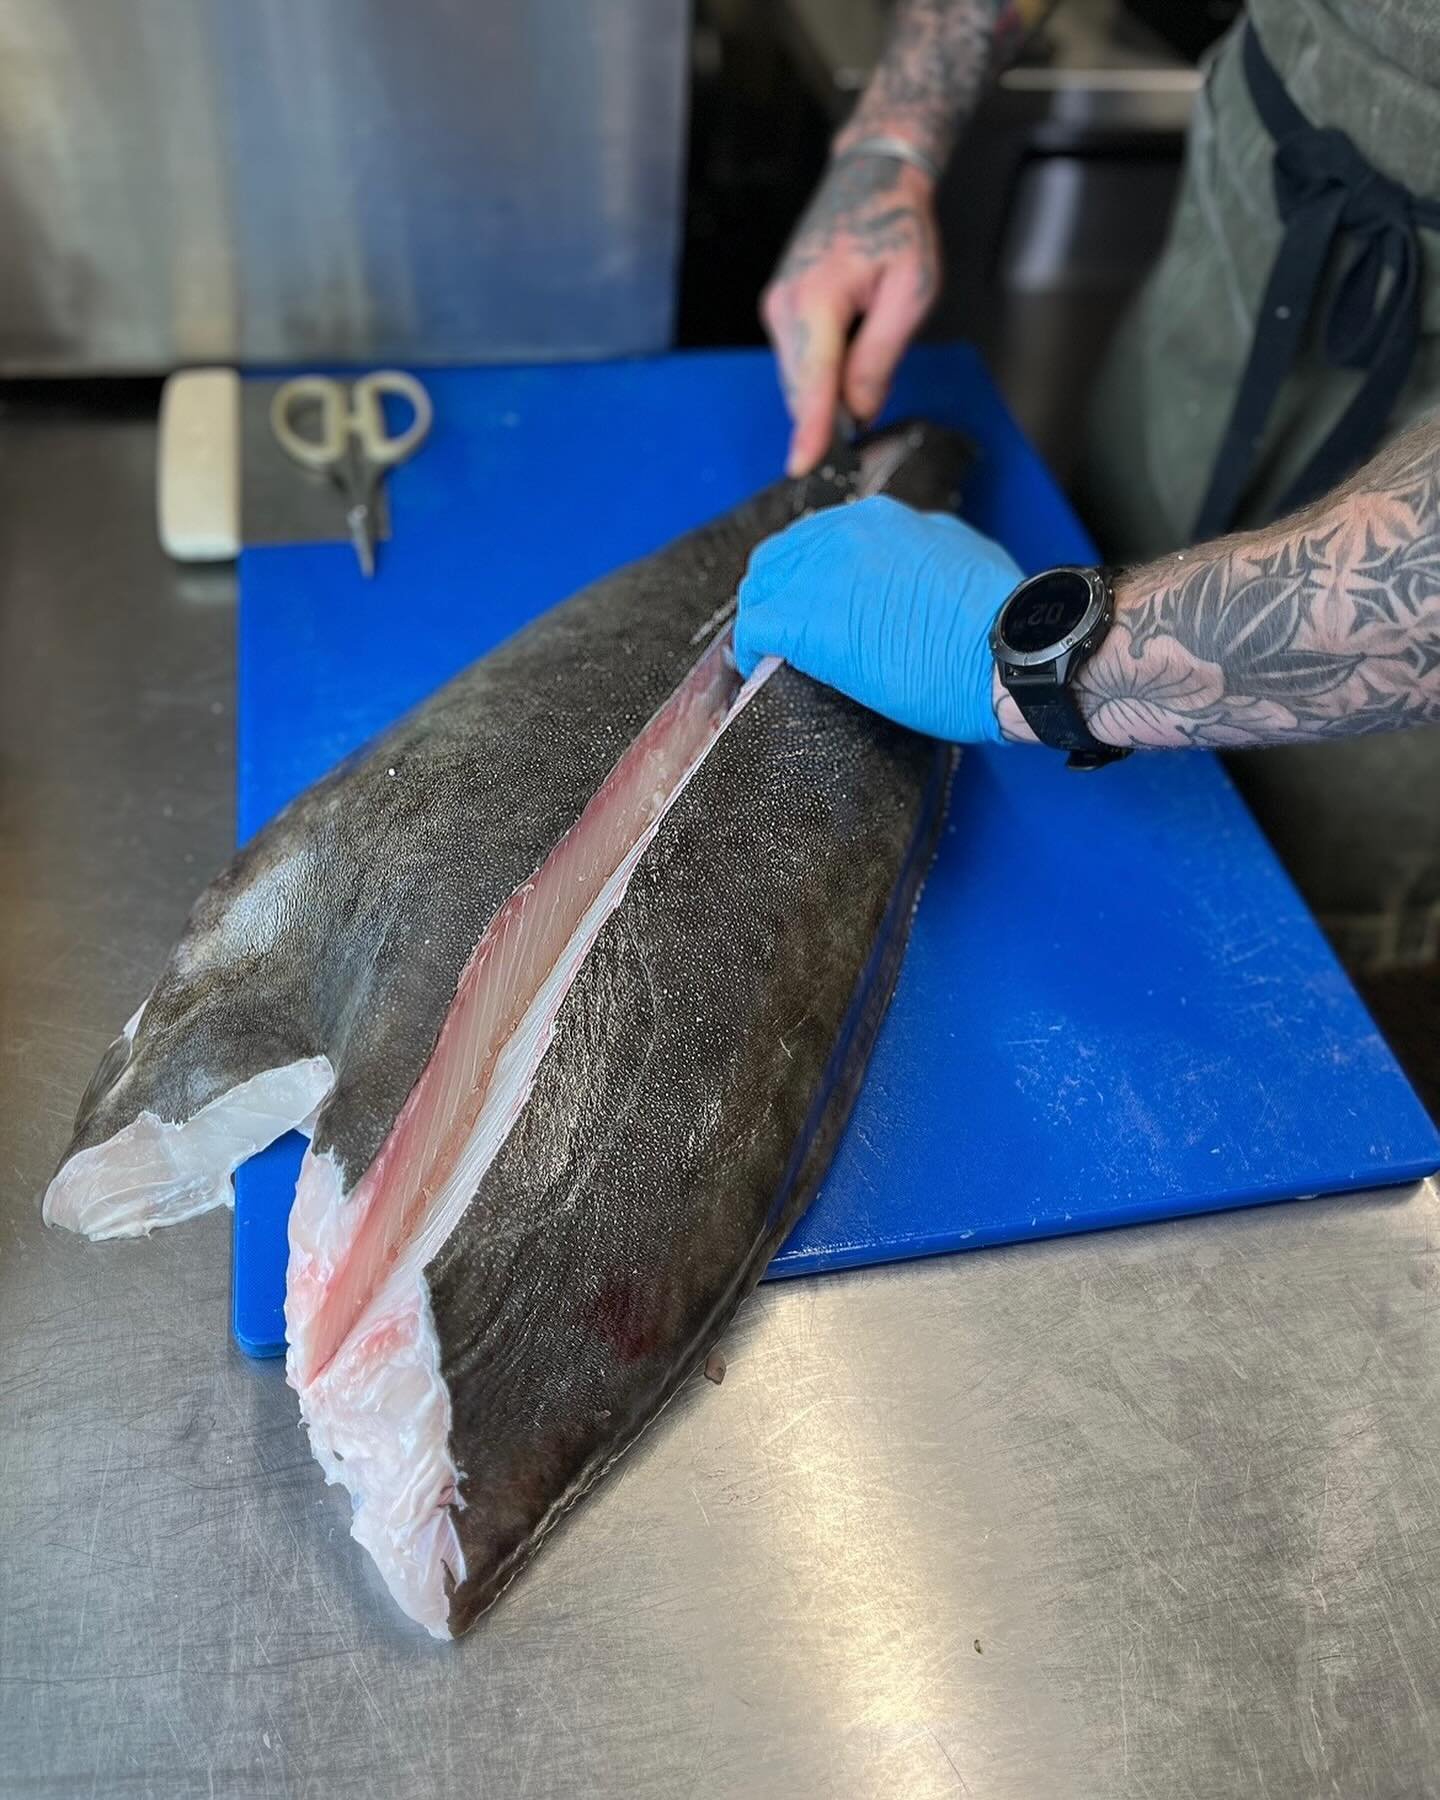 Halibut season is here! 
🐟From the dock of Anchorage Alaska to Pagosa Springs in 24 hours. We are so happy to have this amazing fish on our menu again, thanks to our friends over at Favco! 
.
.
.
.
.
.
.
.
.
#halibut #freshseafood #halibutseason #al